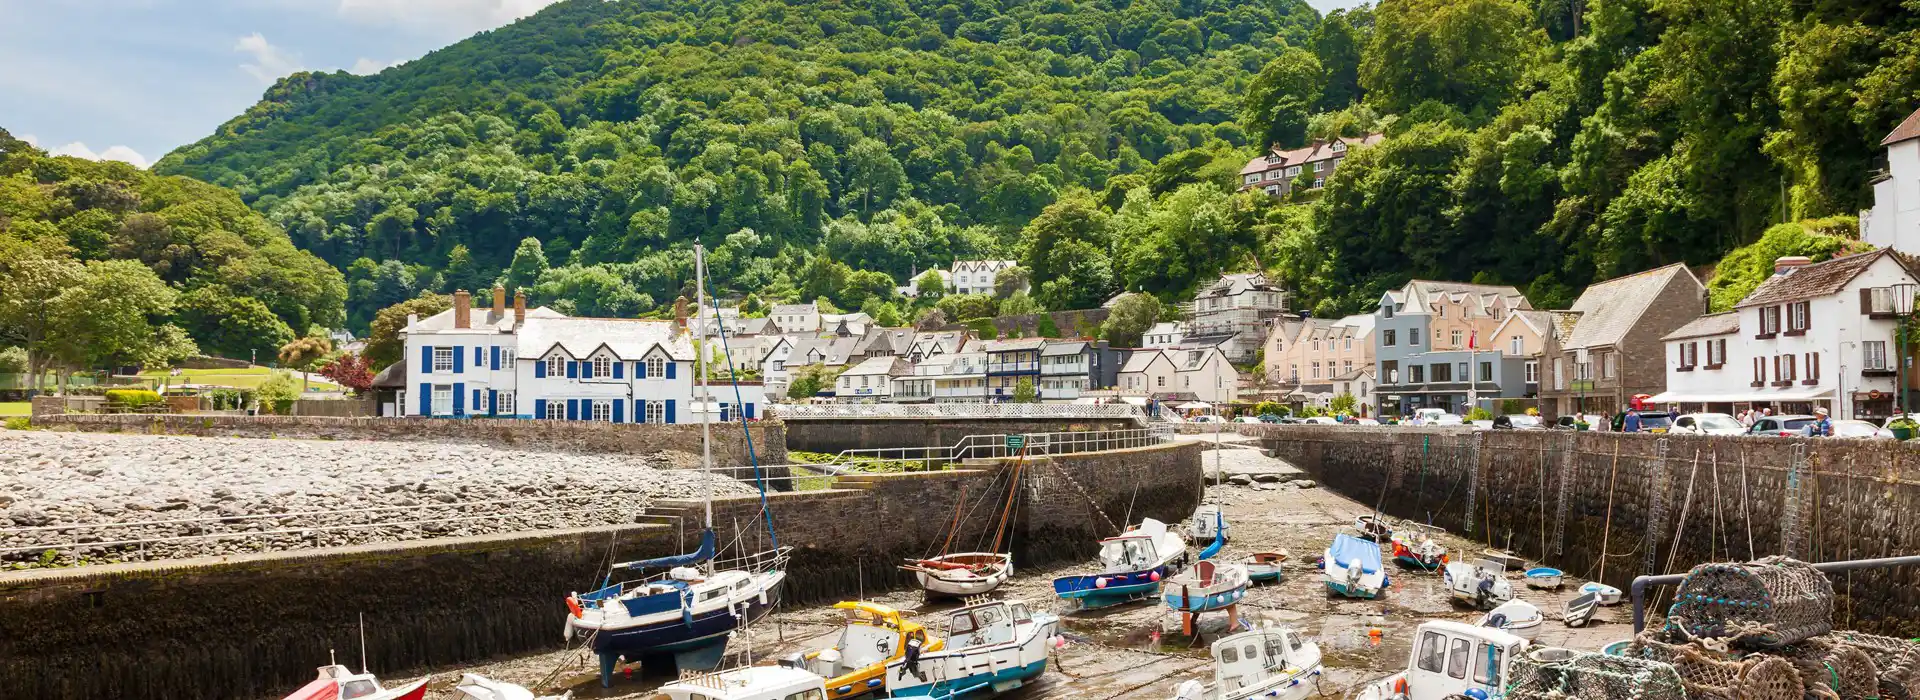 Lynmouth campsites